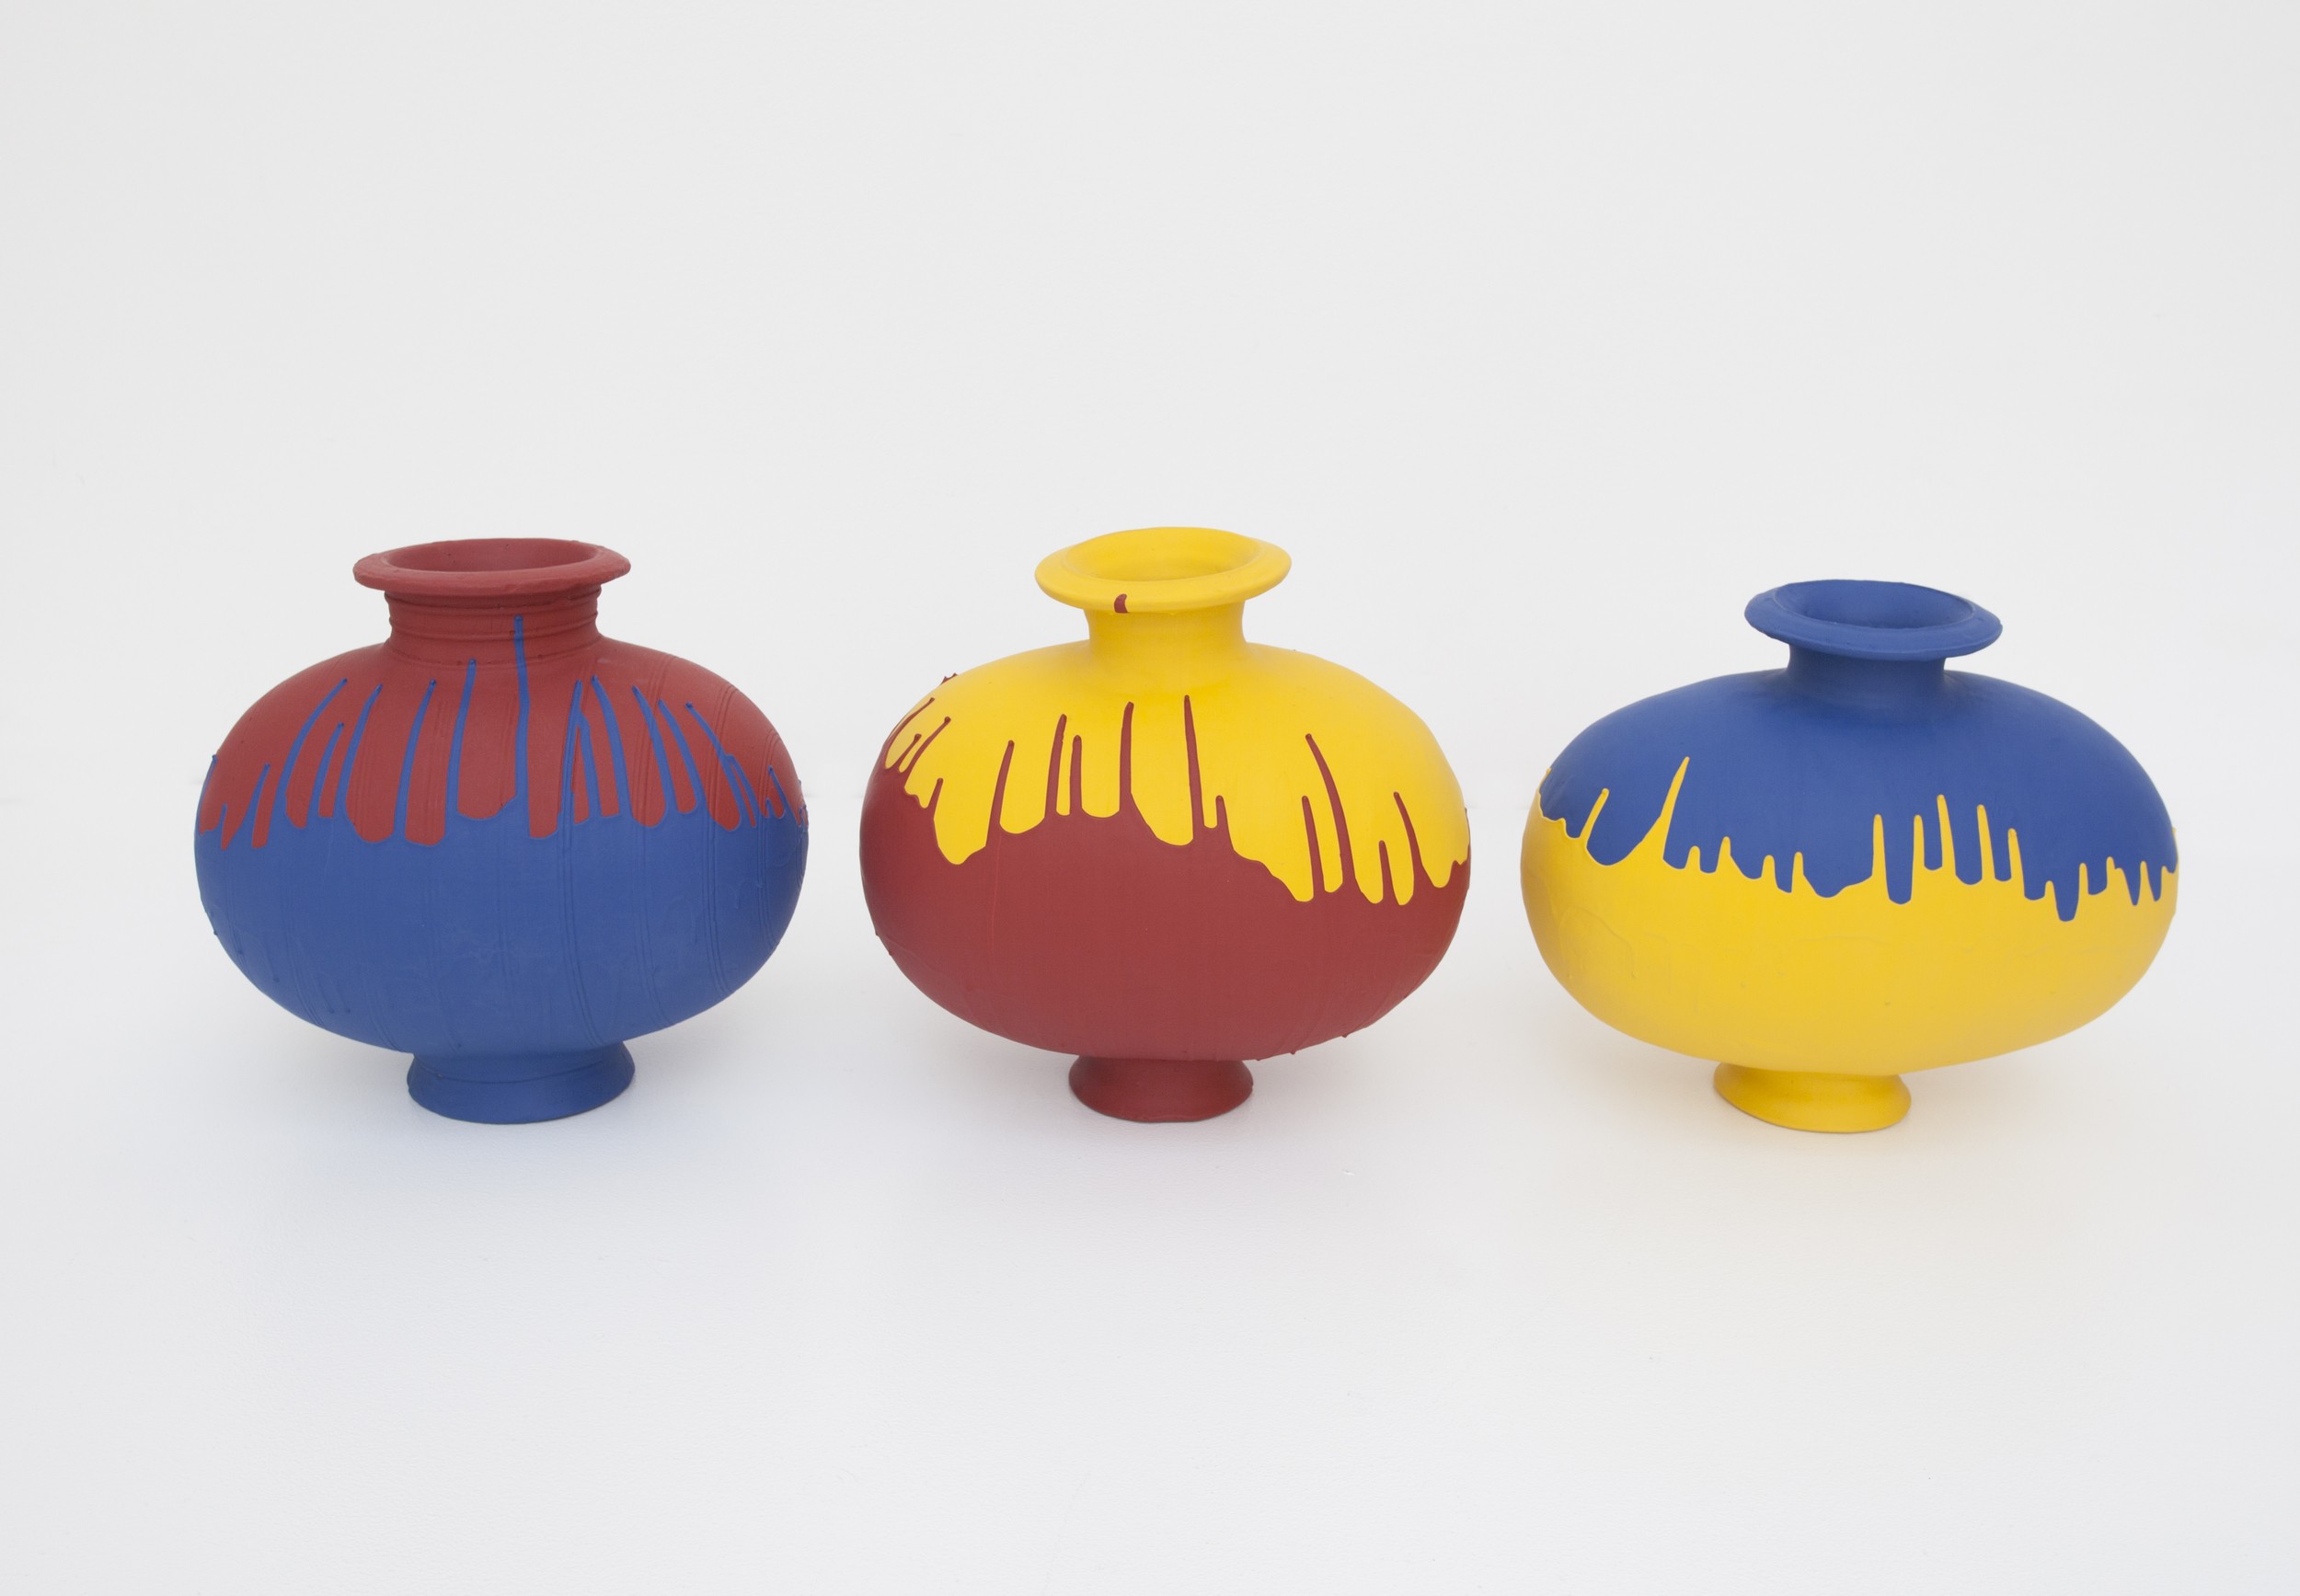 Weiwei's colored vases: artwork or vandalism? – Public Delivery